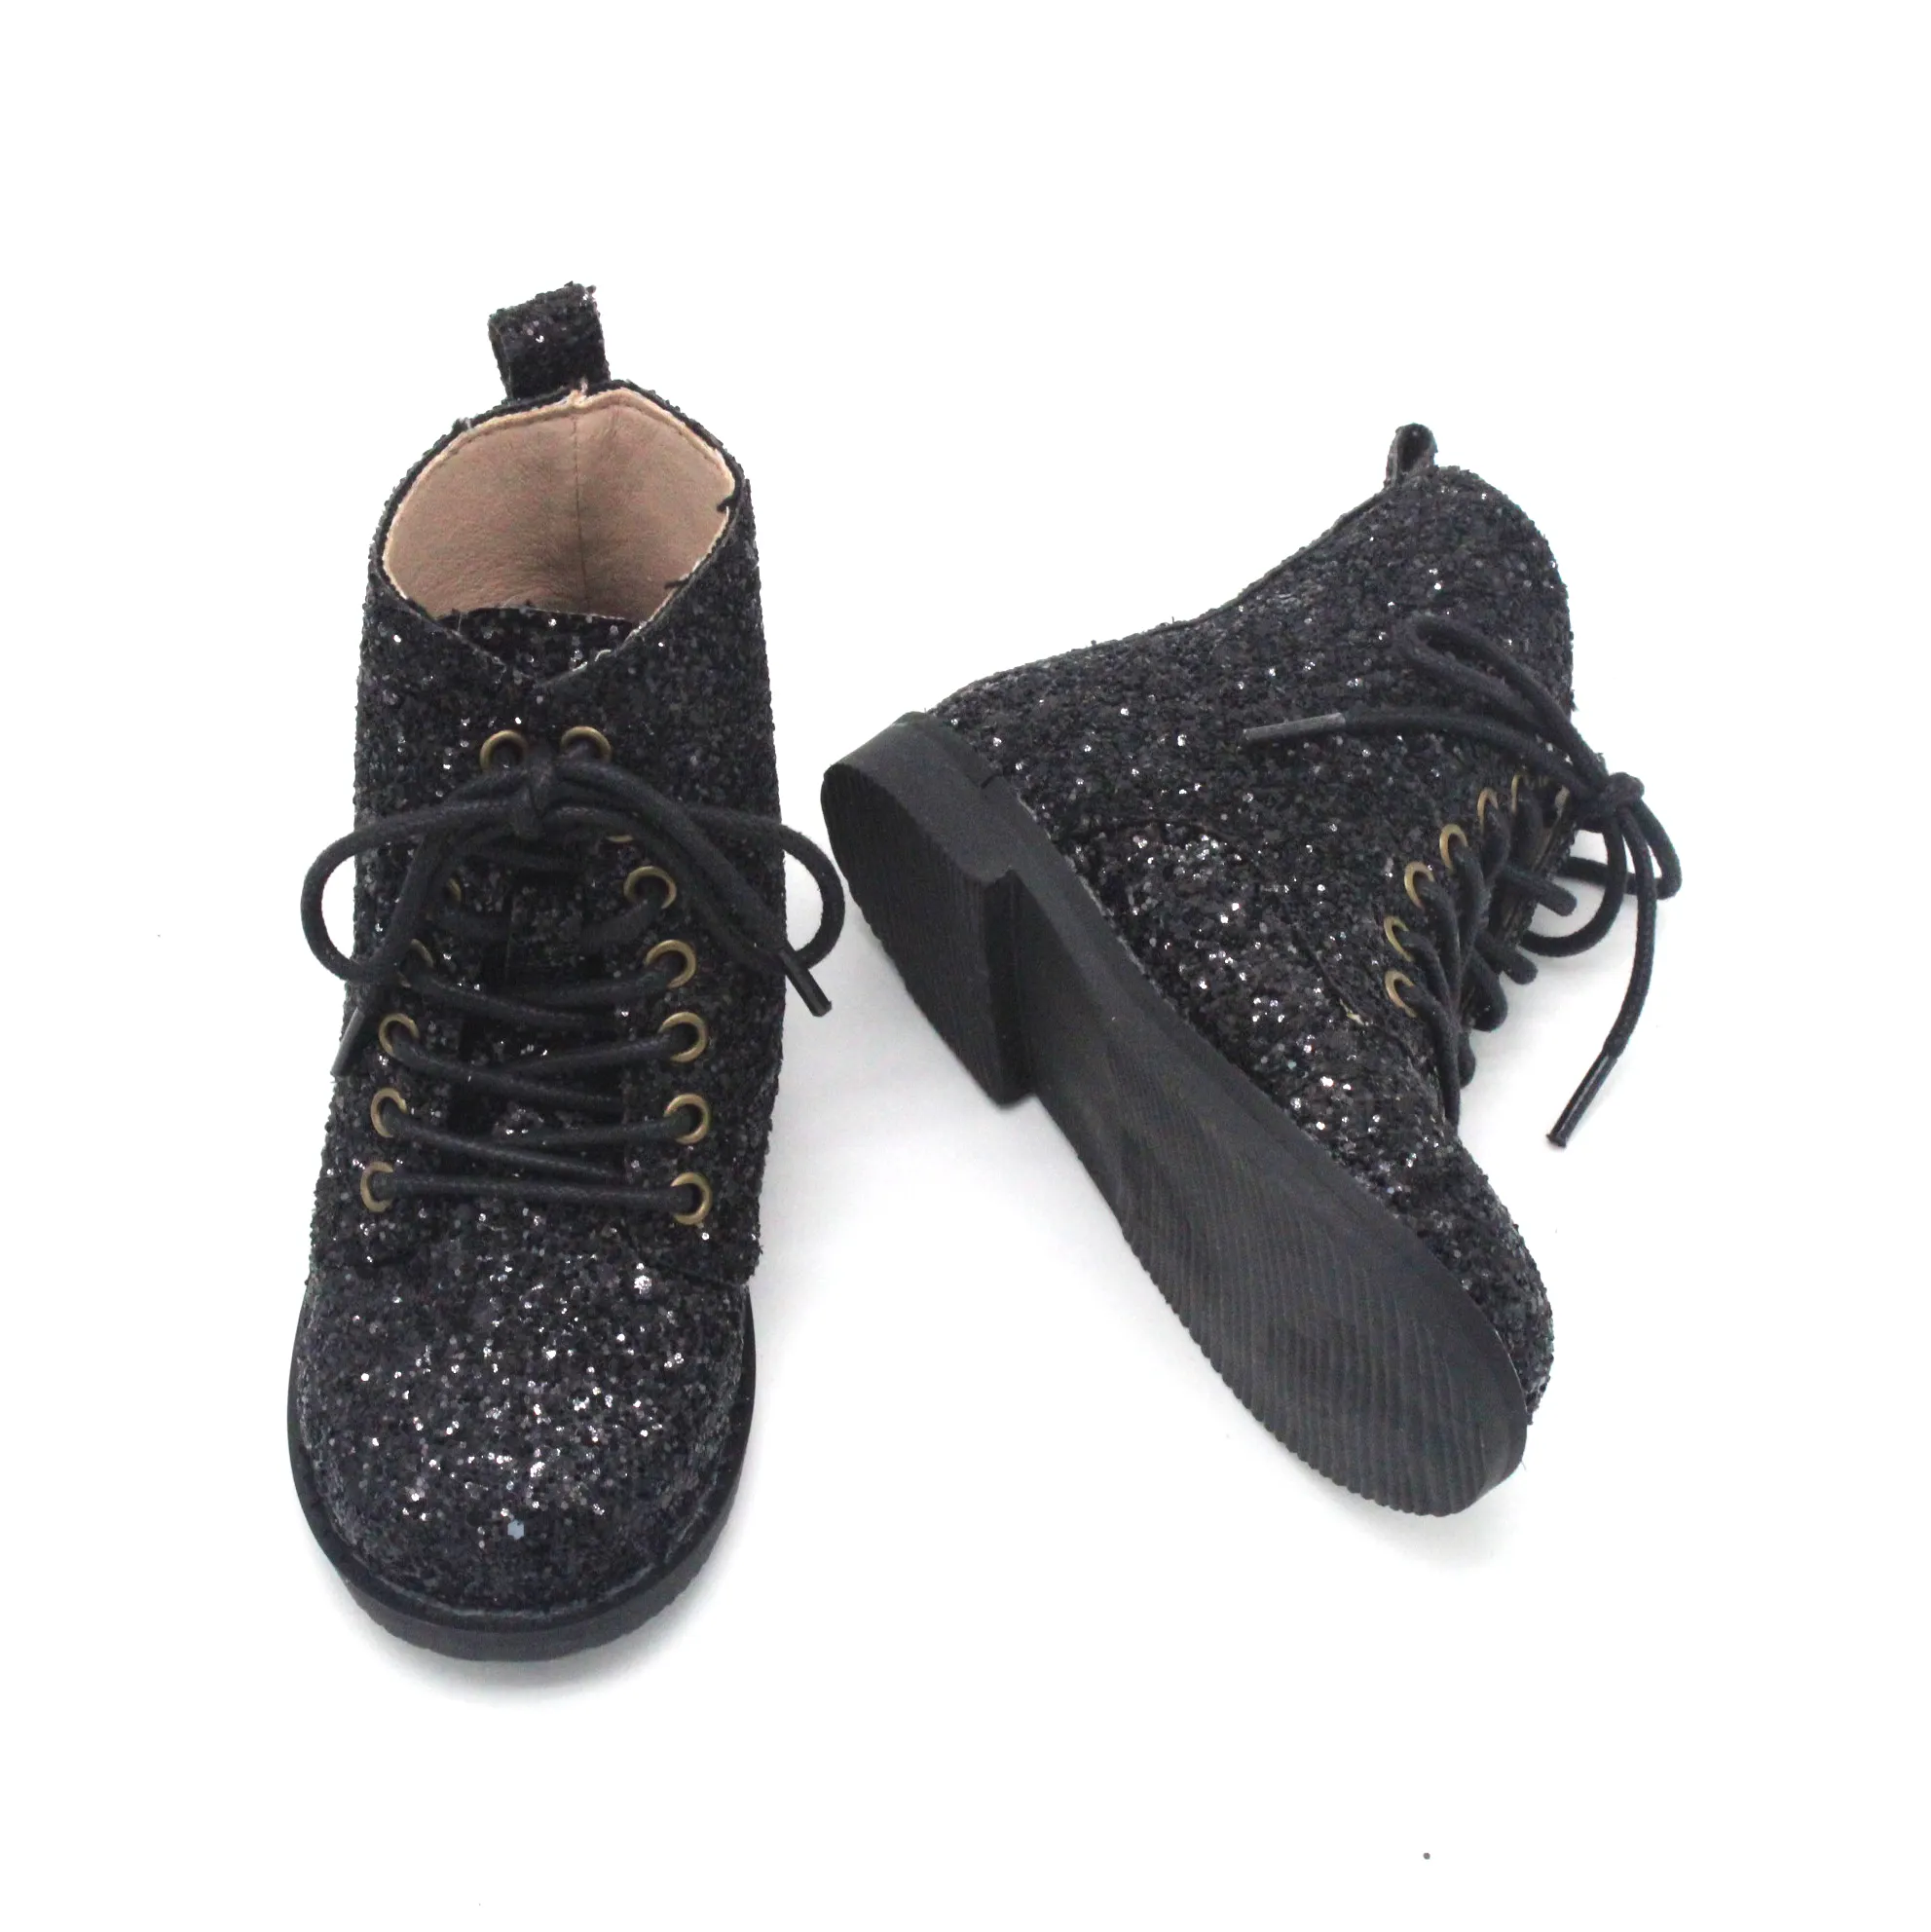 fashion cool black leather high top shoelace baby girls boys shoes boots